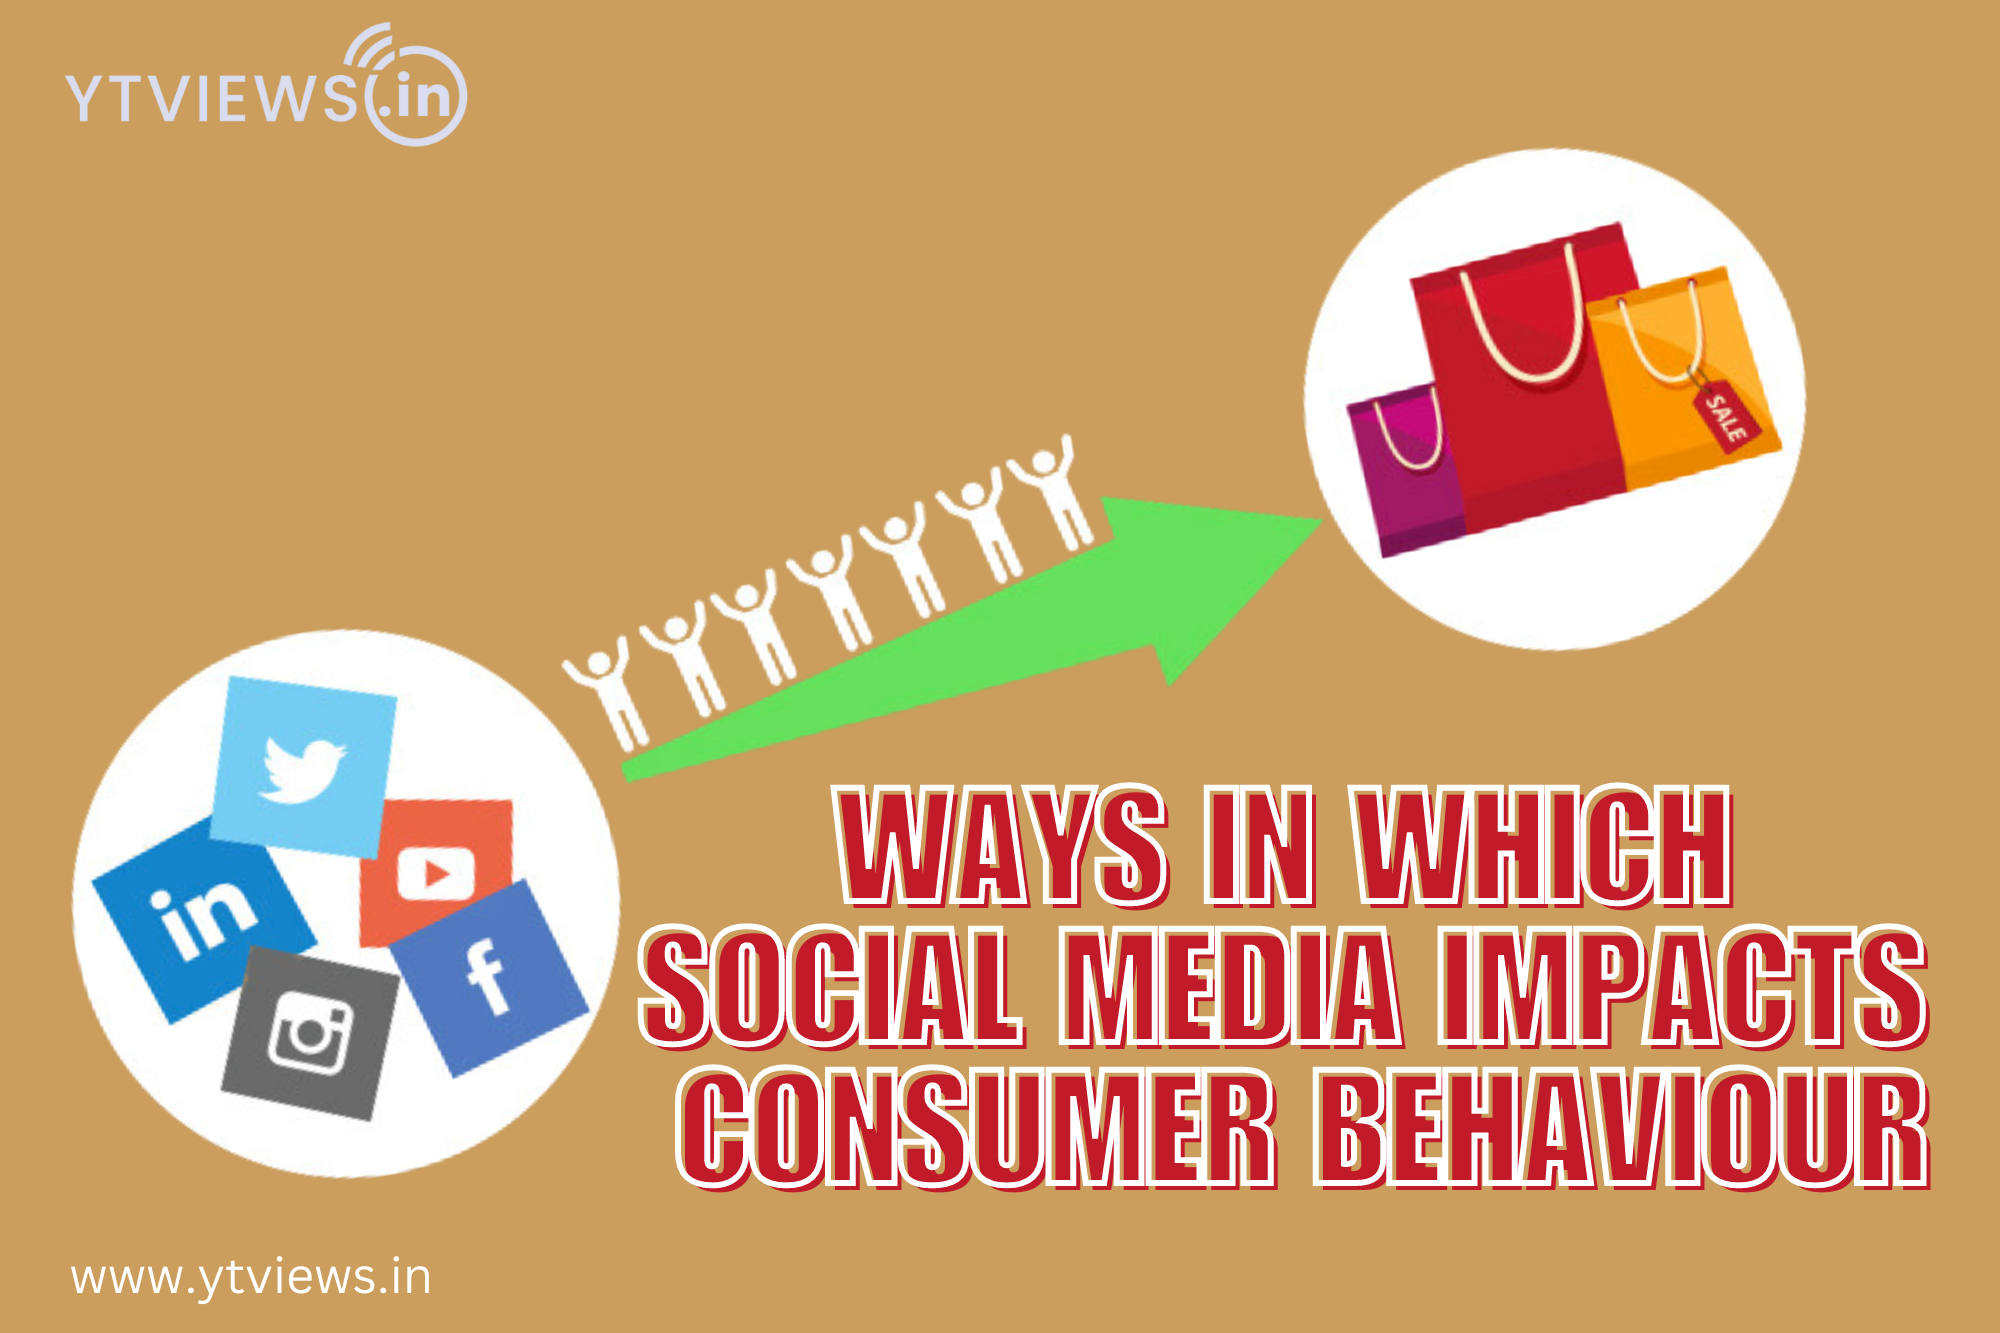 Ways in which social media impacts consumer behaviour